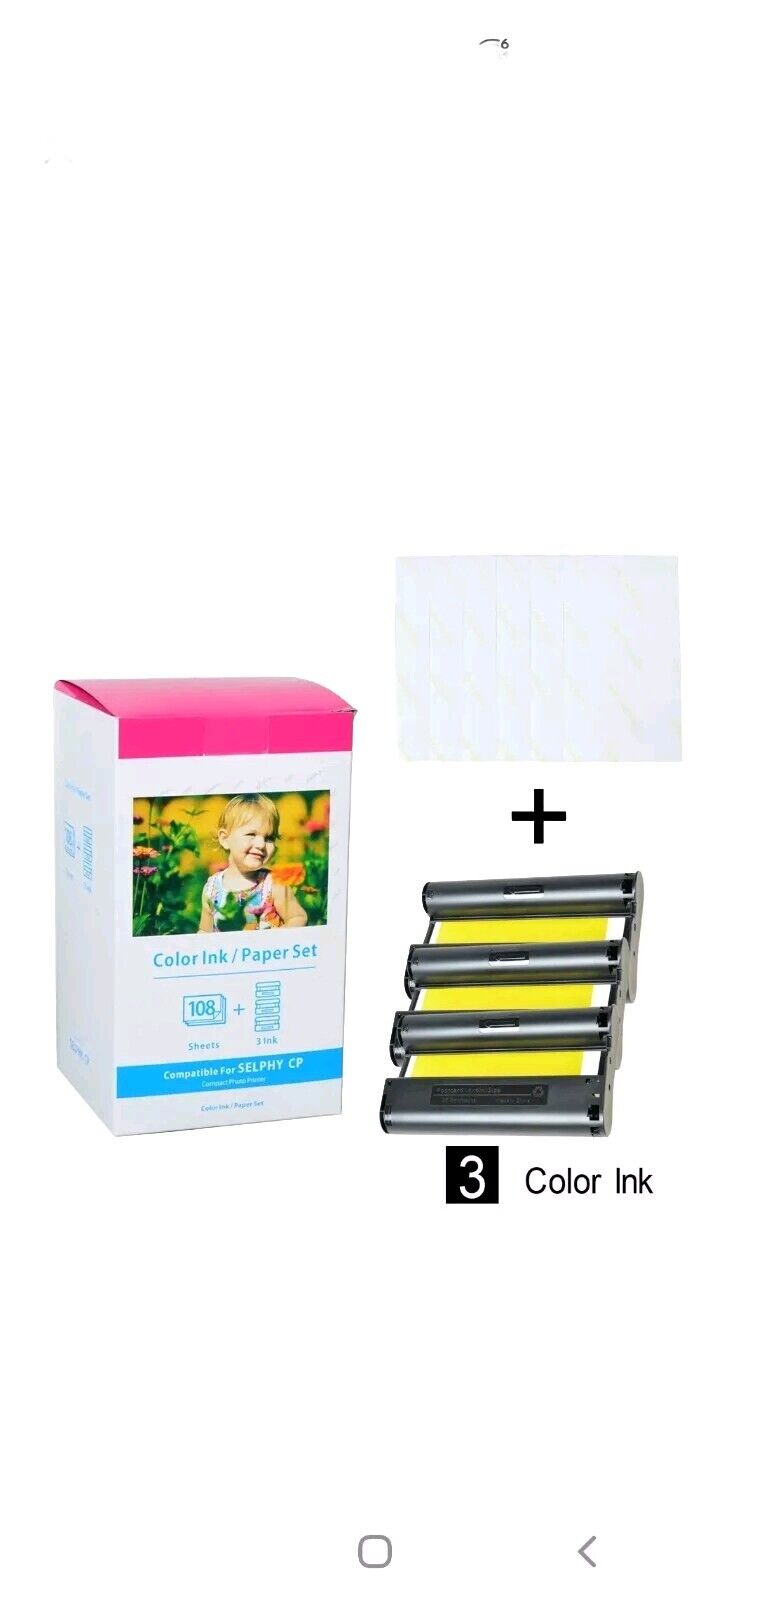 KP-108IN 3 x Ink and 108 Paper Sheets for Canon Selphy CP900 CP910 CP1300 CP780